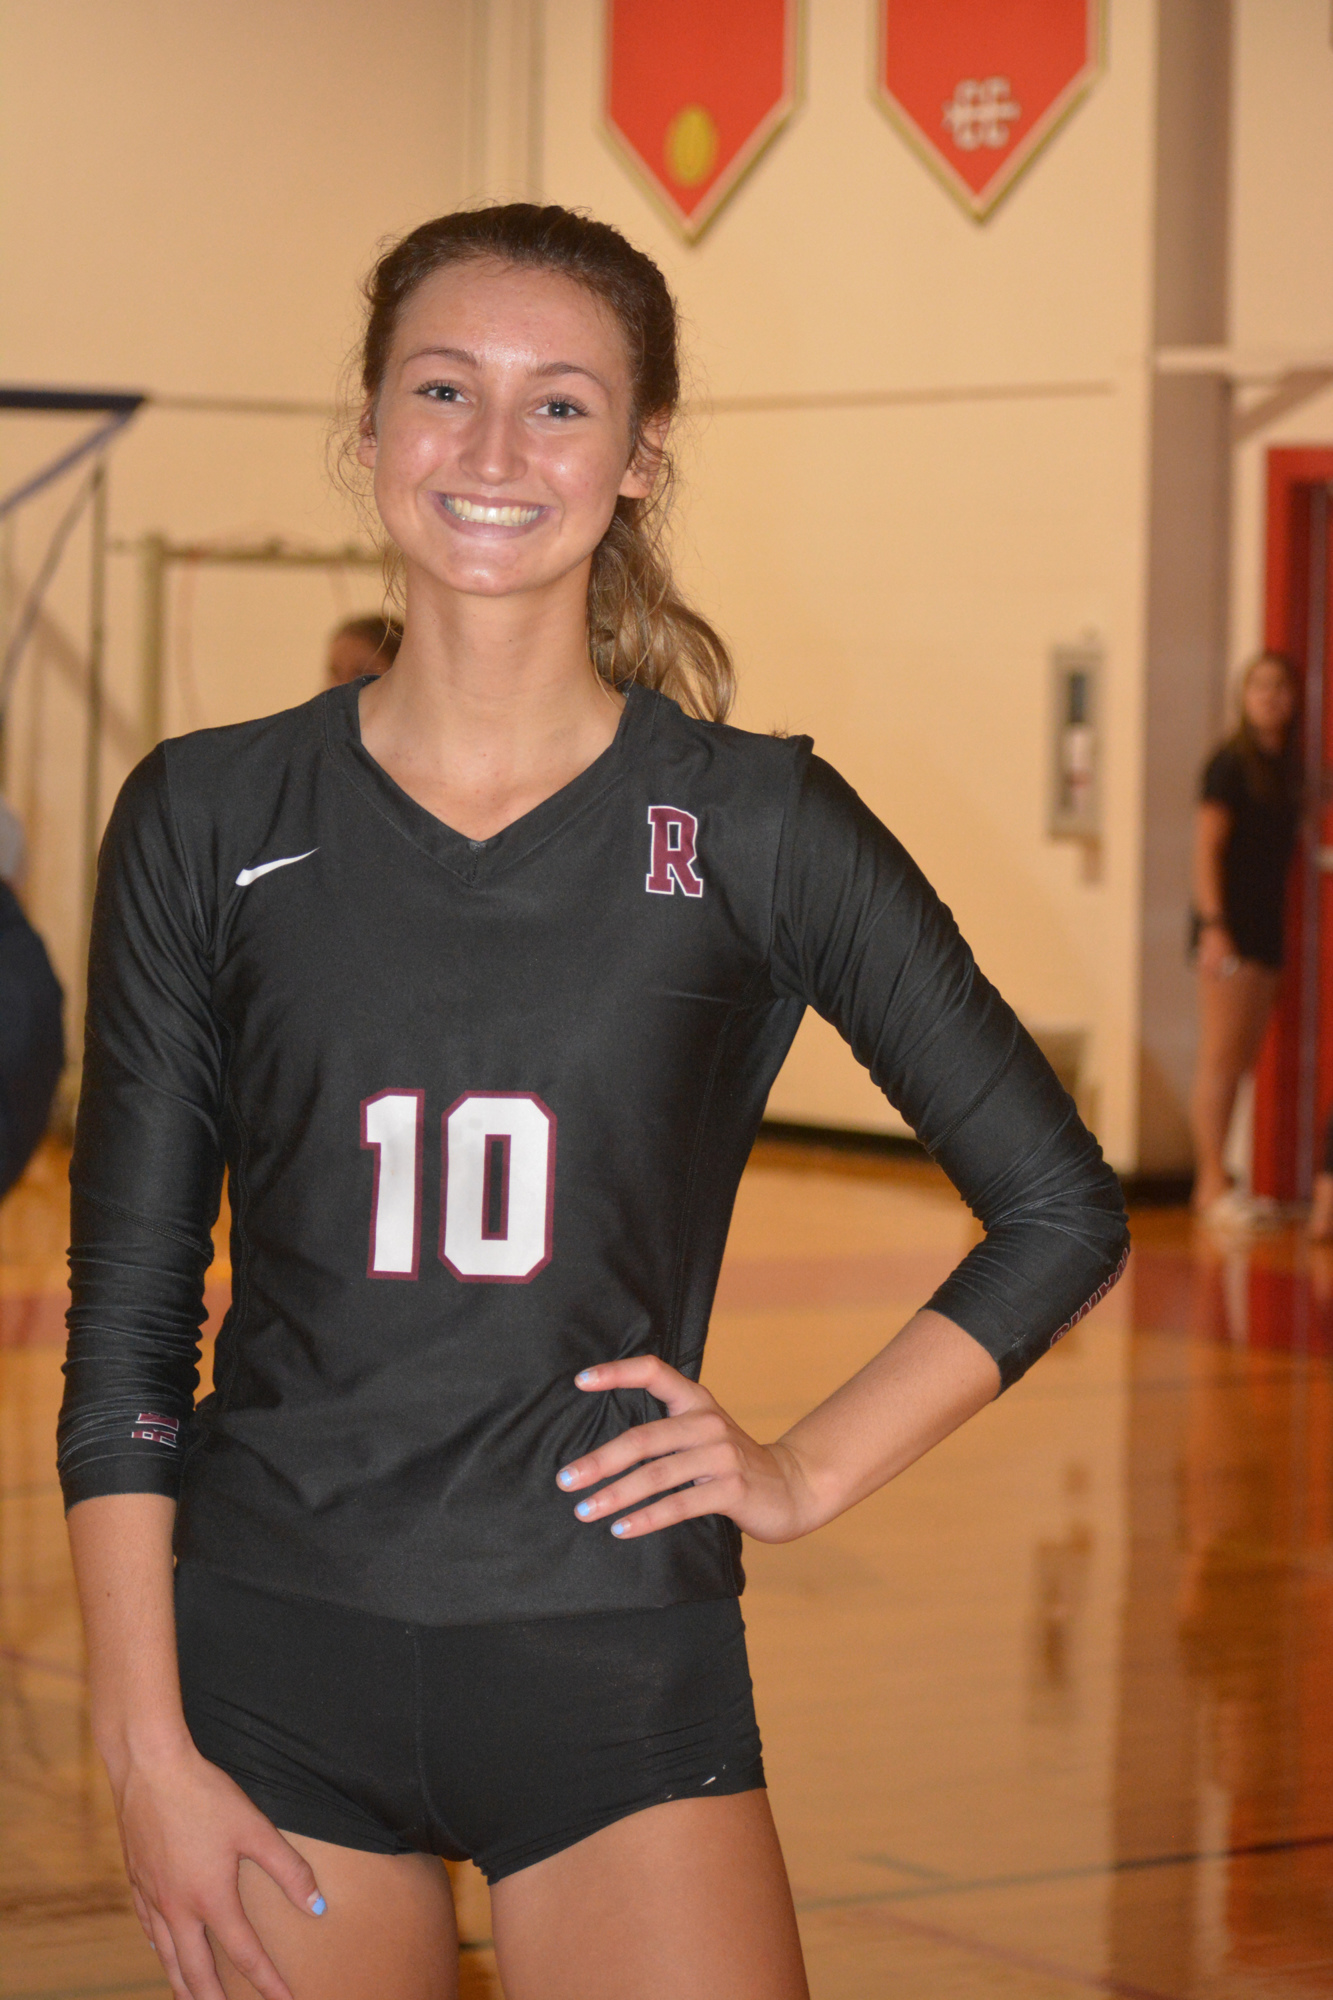 2. Riverview High junior Madison Binkley is a star in both beach and indoor volleyball.